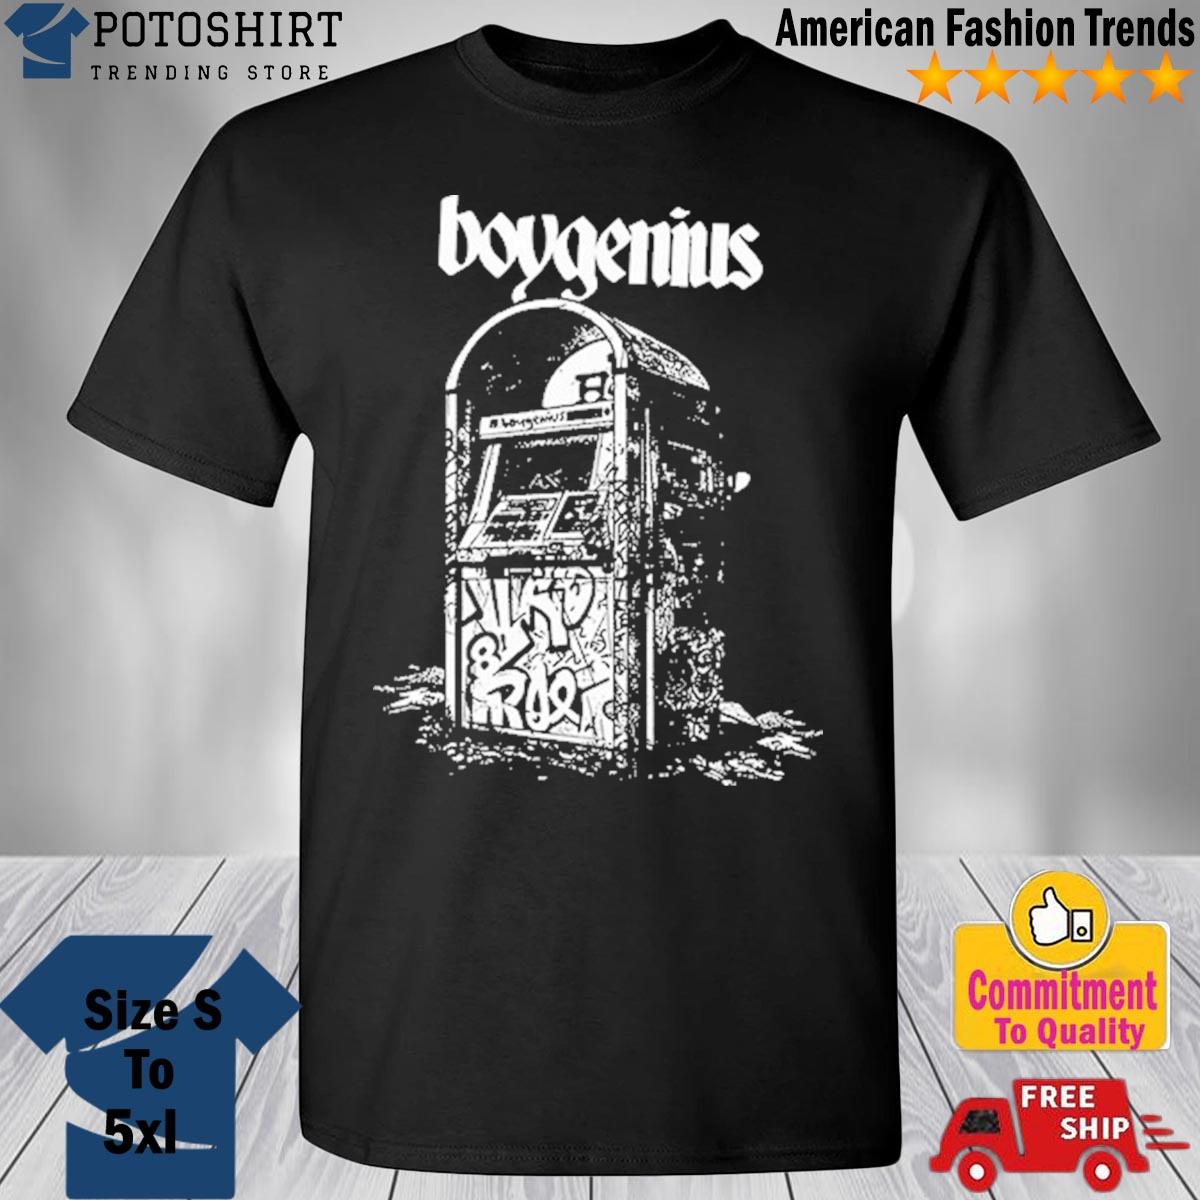 Elevate Your Indie Vibe with Boygenius Store